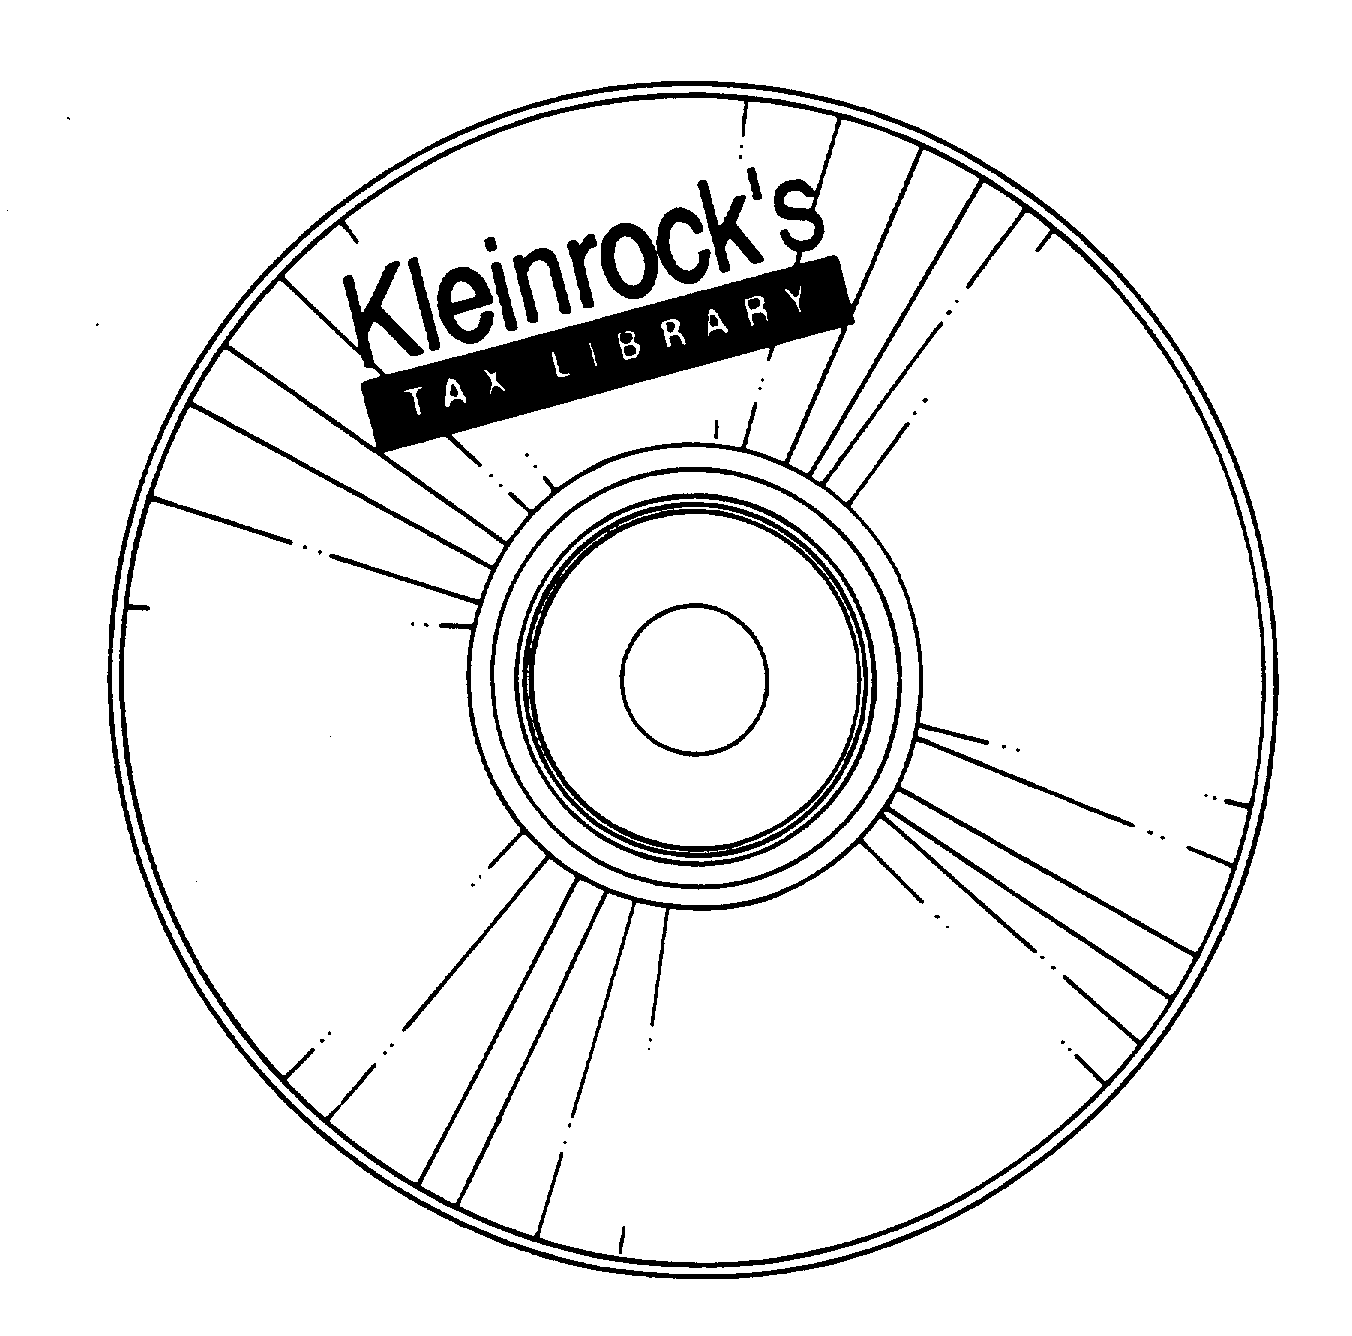 KLEINROCK'S TAX LIBRARY